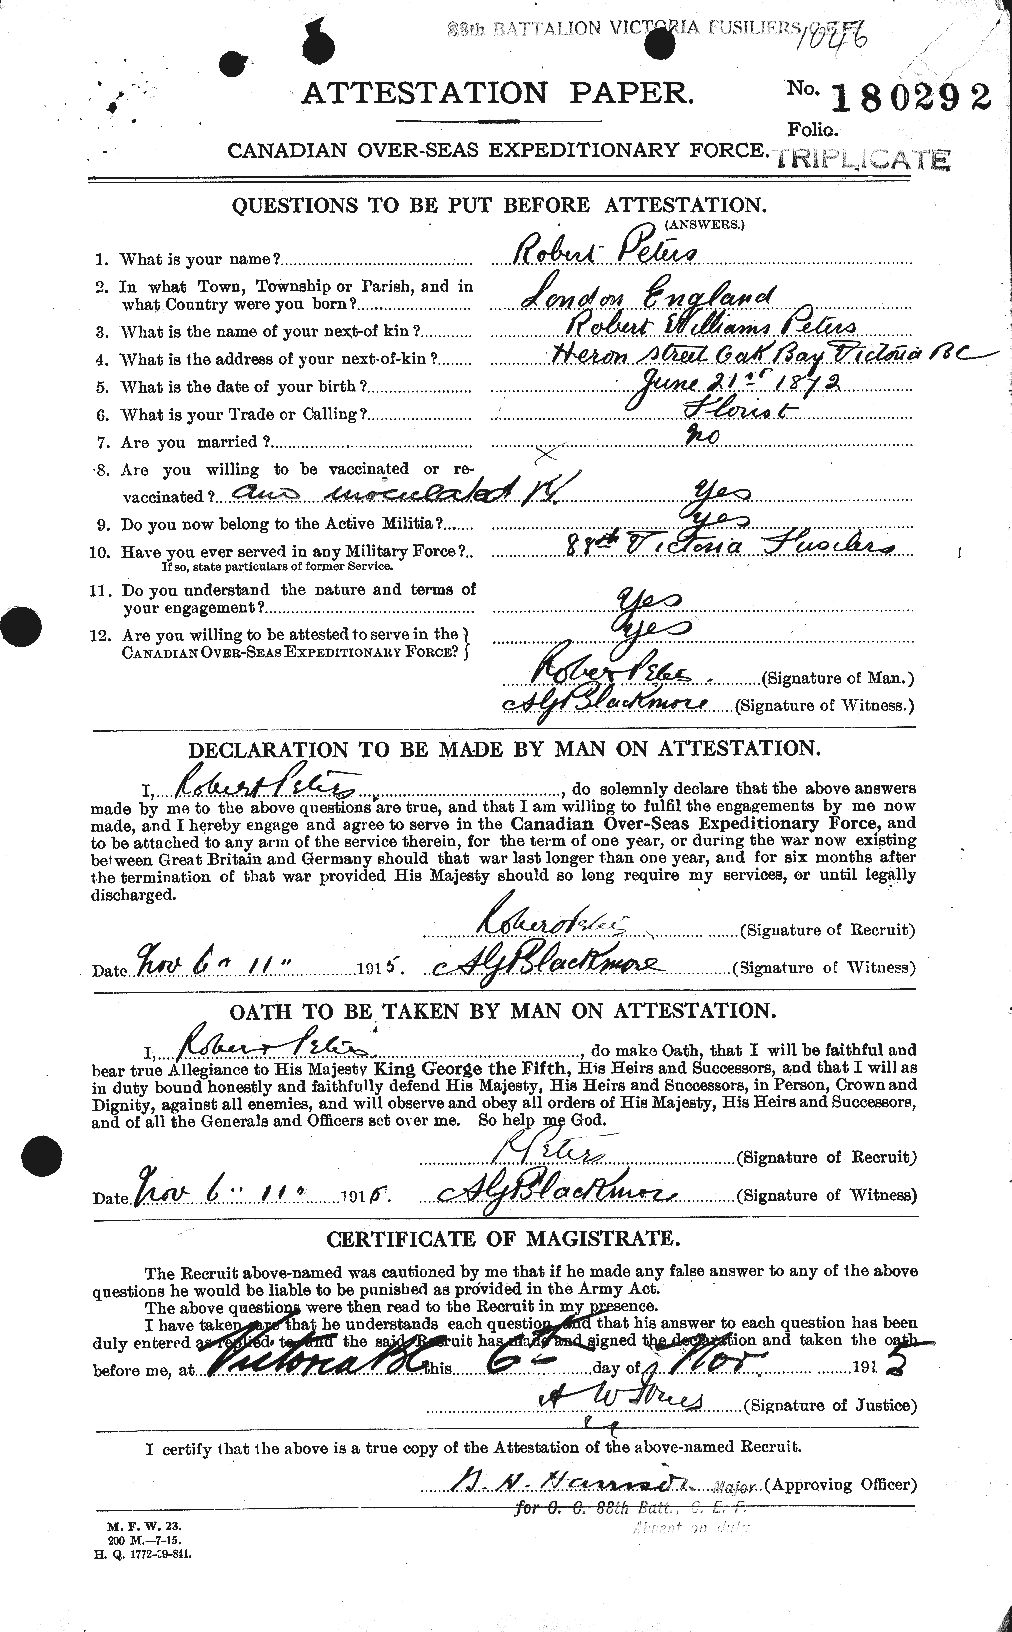 Personnel Records of the First World War - CEF 575610a